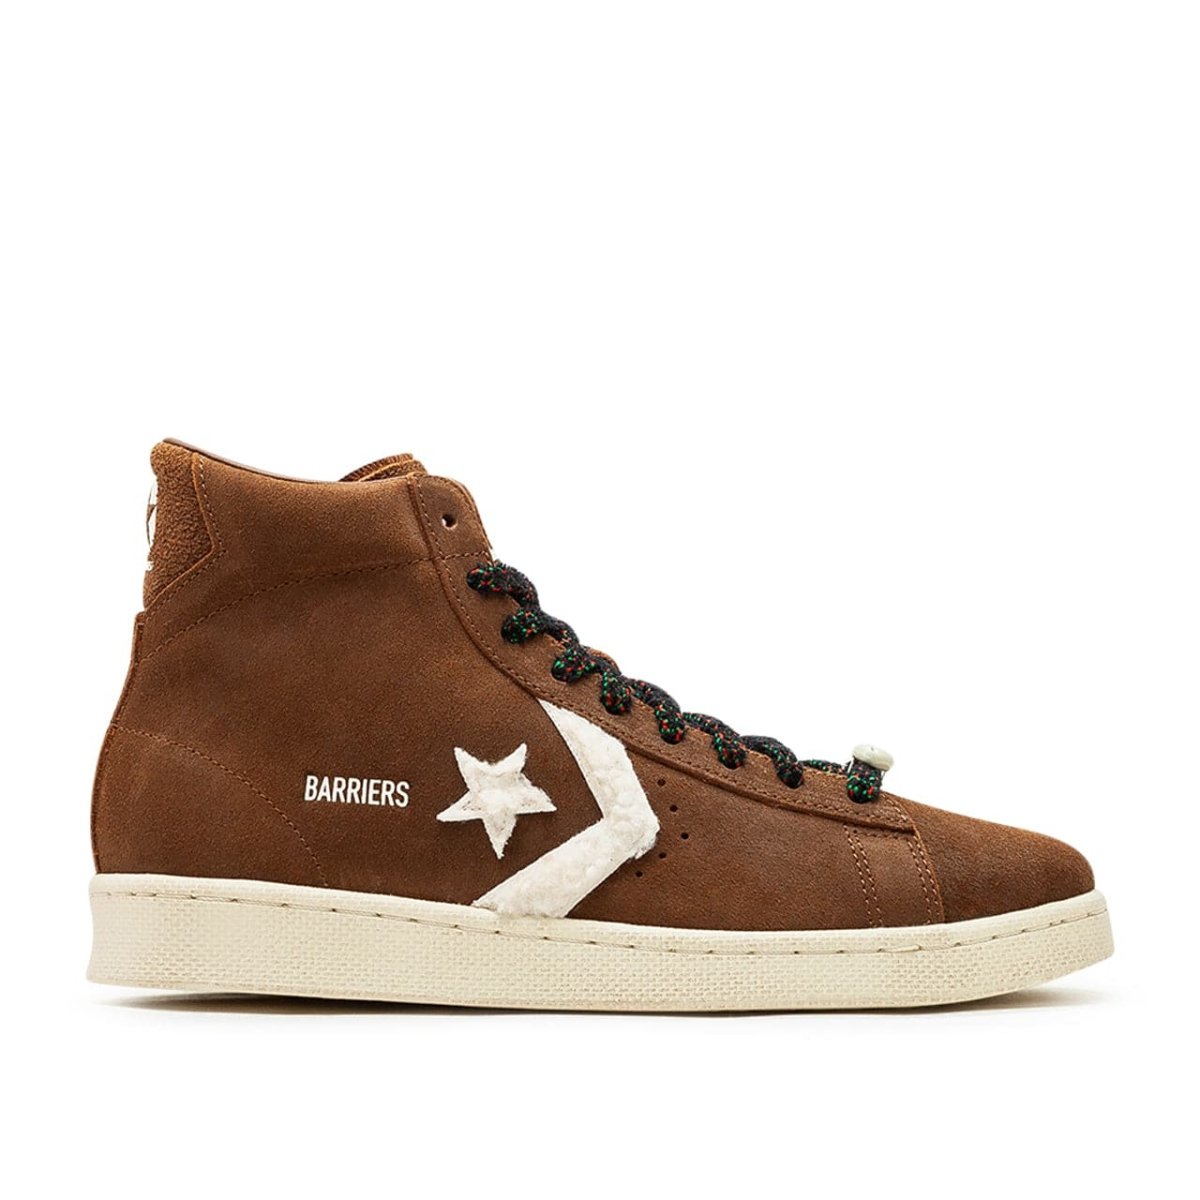 Image of Converse x Barriers Pro Leather Hi (Brown)